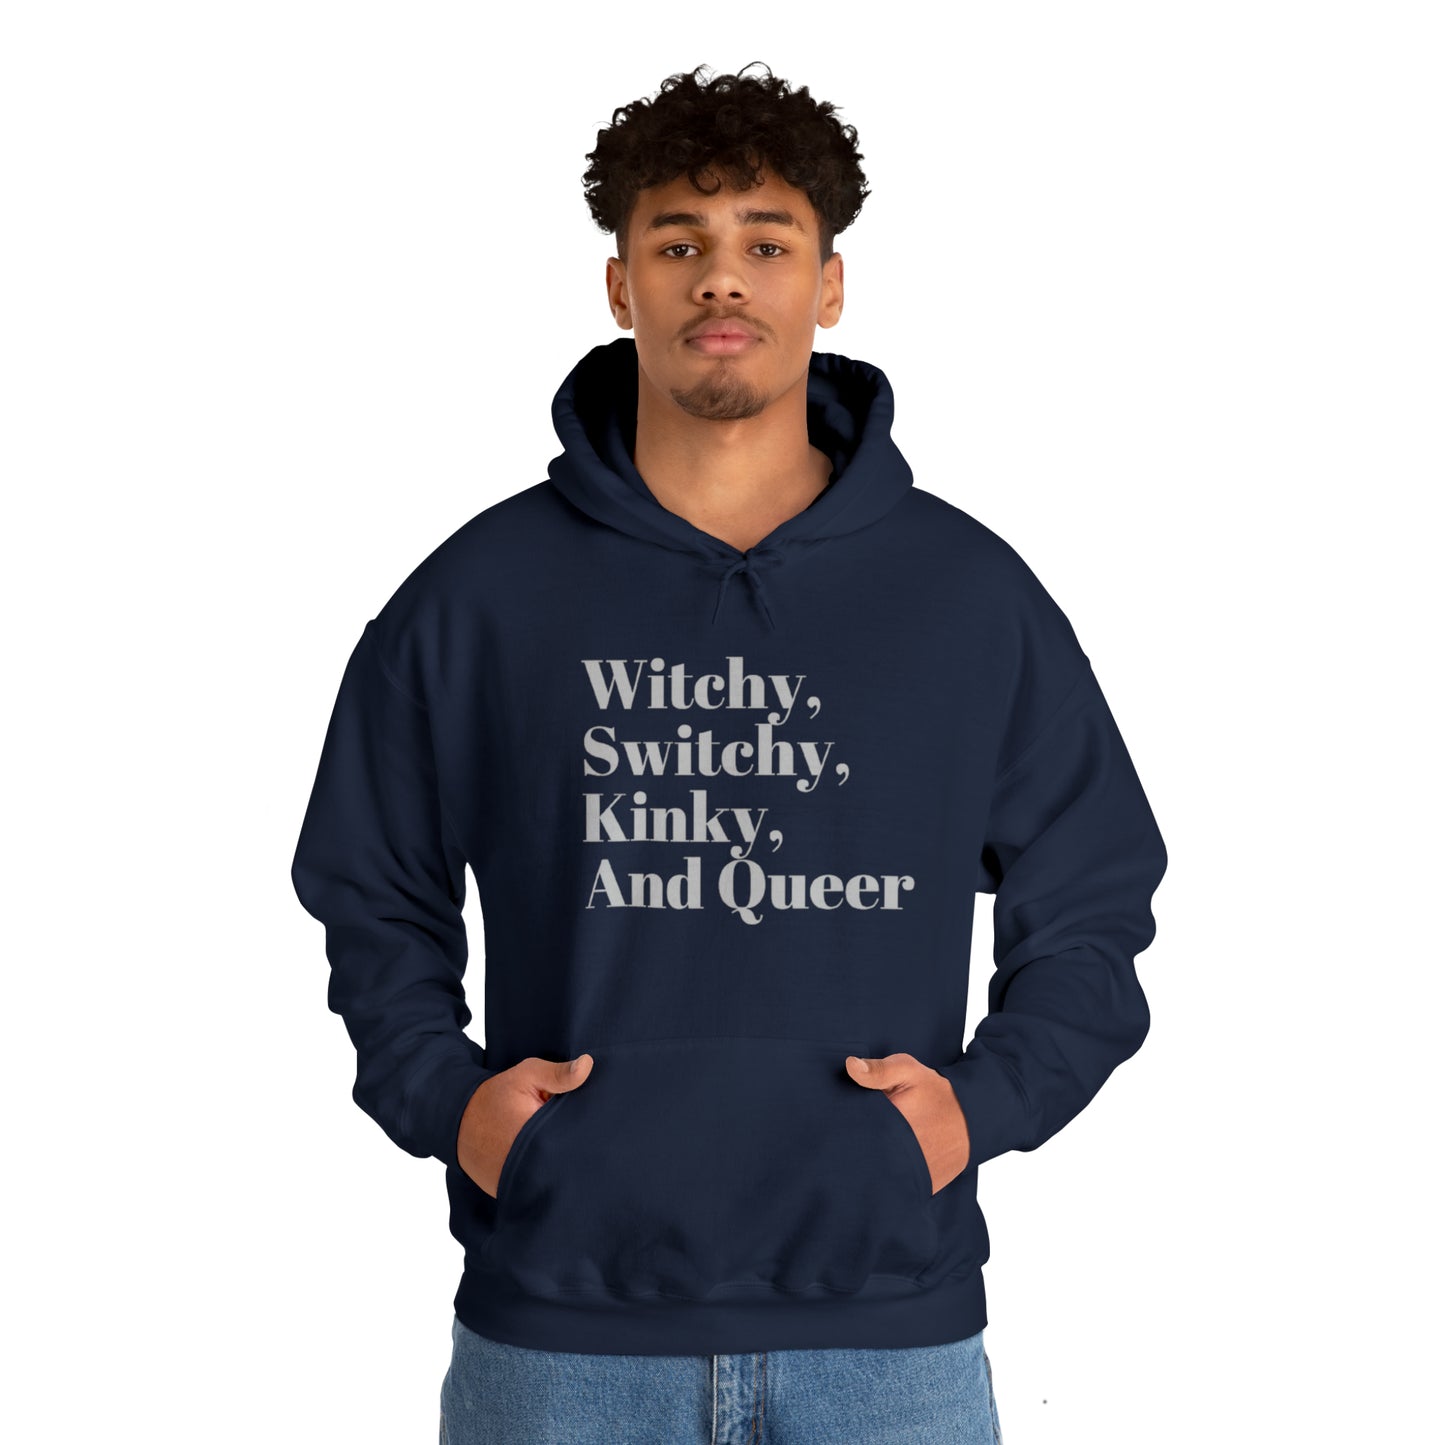 Witchy, Switchy, Kinky, and Queer Unisex Hooded Sweatshirt